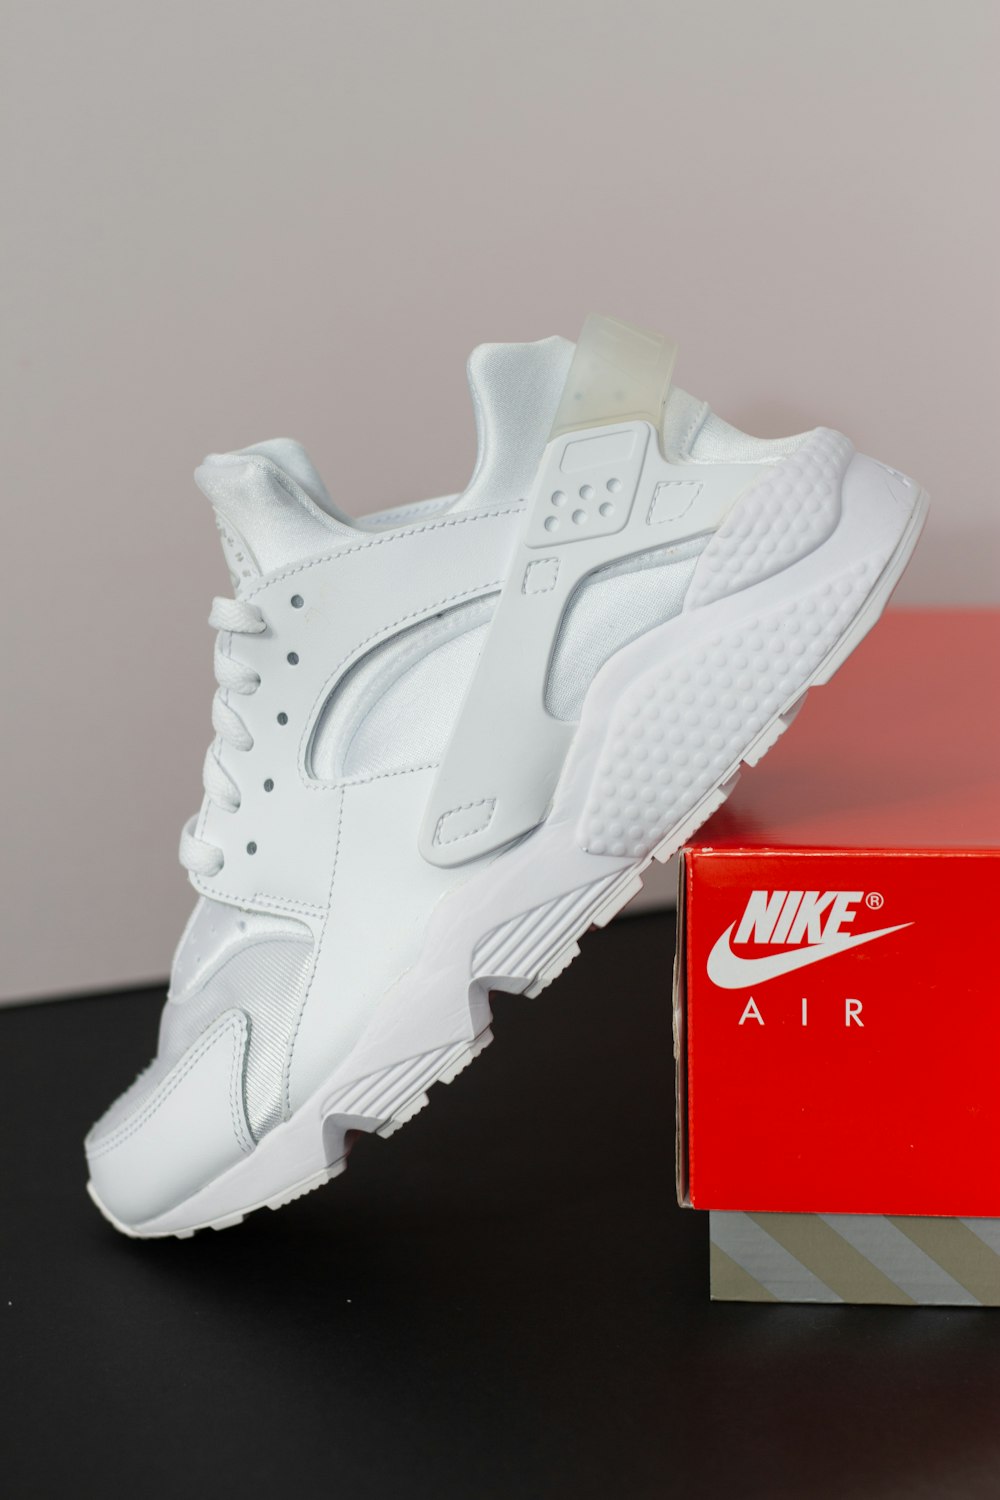 a pair of white nike shoes next to a box